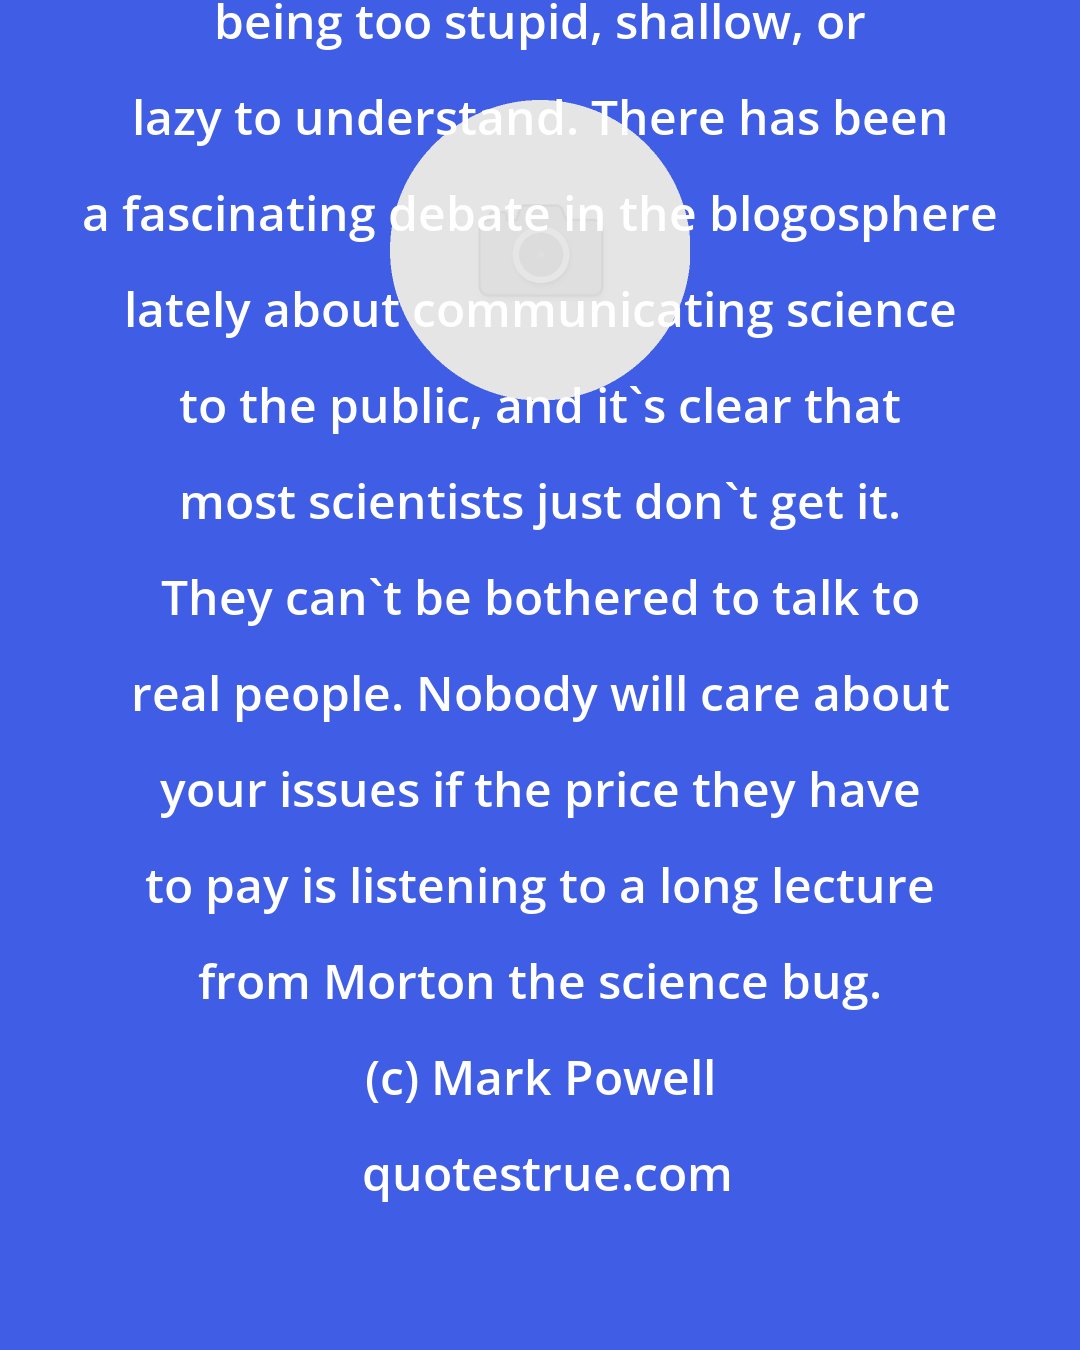 Mark Powell: Scientists blame the audience for being too stupid, shallow, or lazy to understand. There has been a fascinating debate in the blogosphere lately about communicating science to the public, and it's clear that most scientists just don't get it. They can't be bothered to talk to real people. Nobody will care about your issues if the price they have to pay is listening to a long lecture from Morton the science bug.